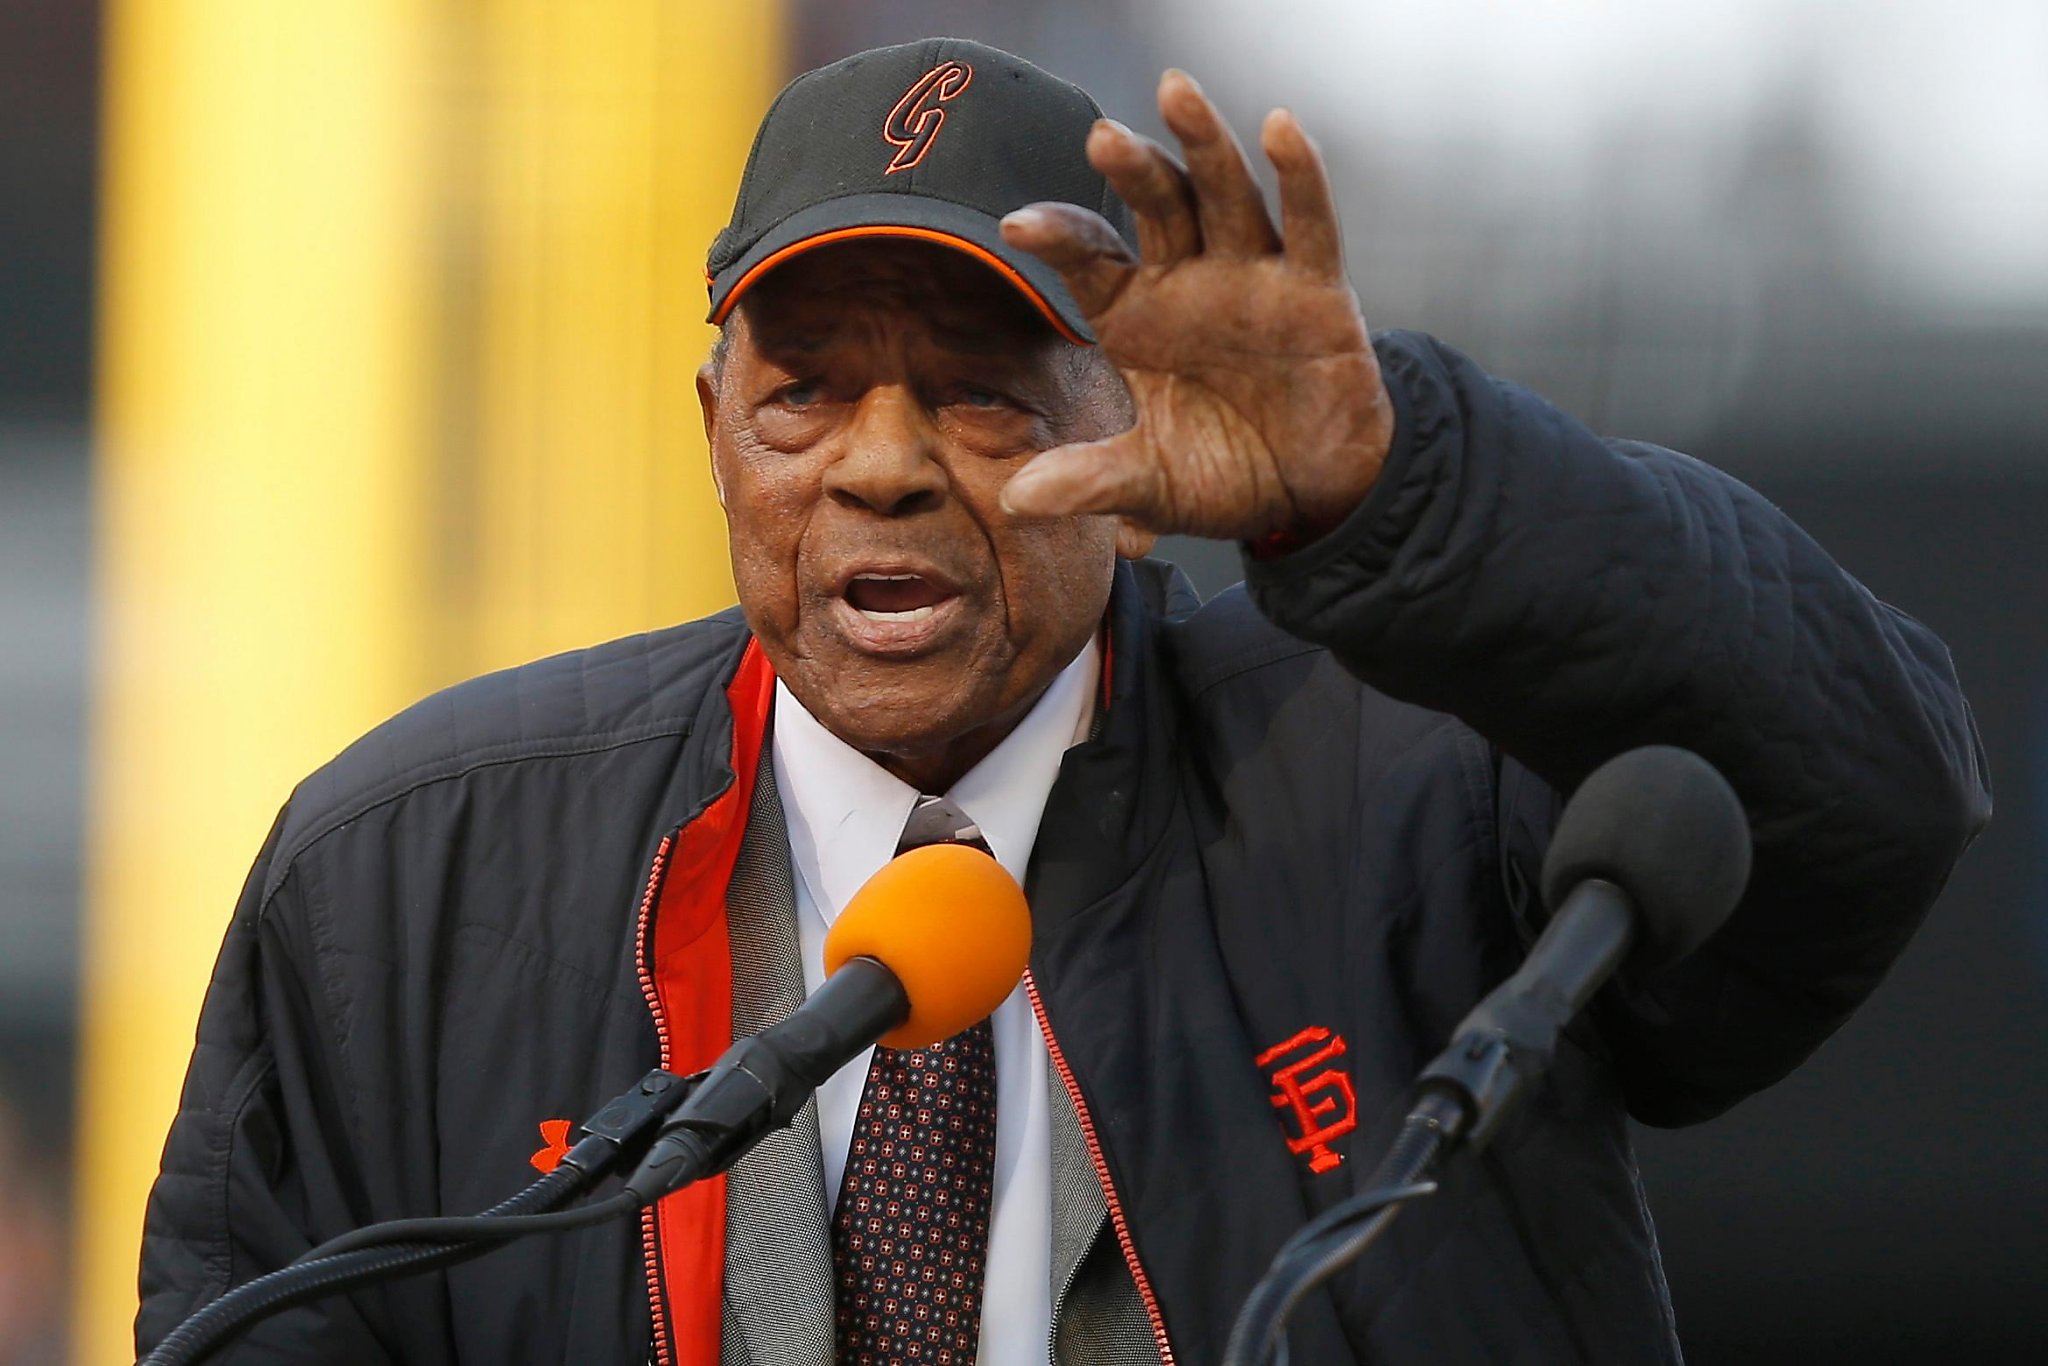 Willie Mays says Barry Bonds 'deserves to be in the Hall of Fame